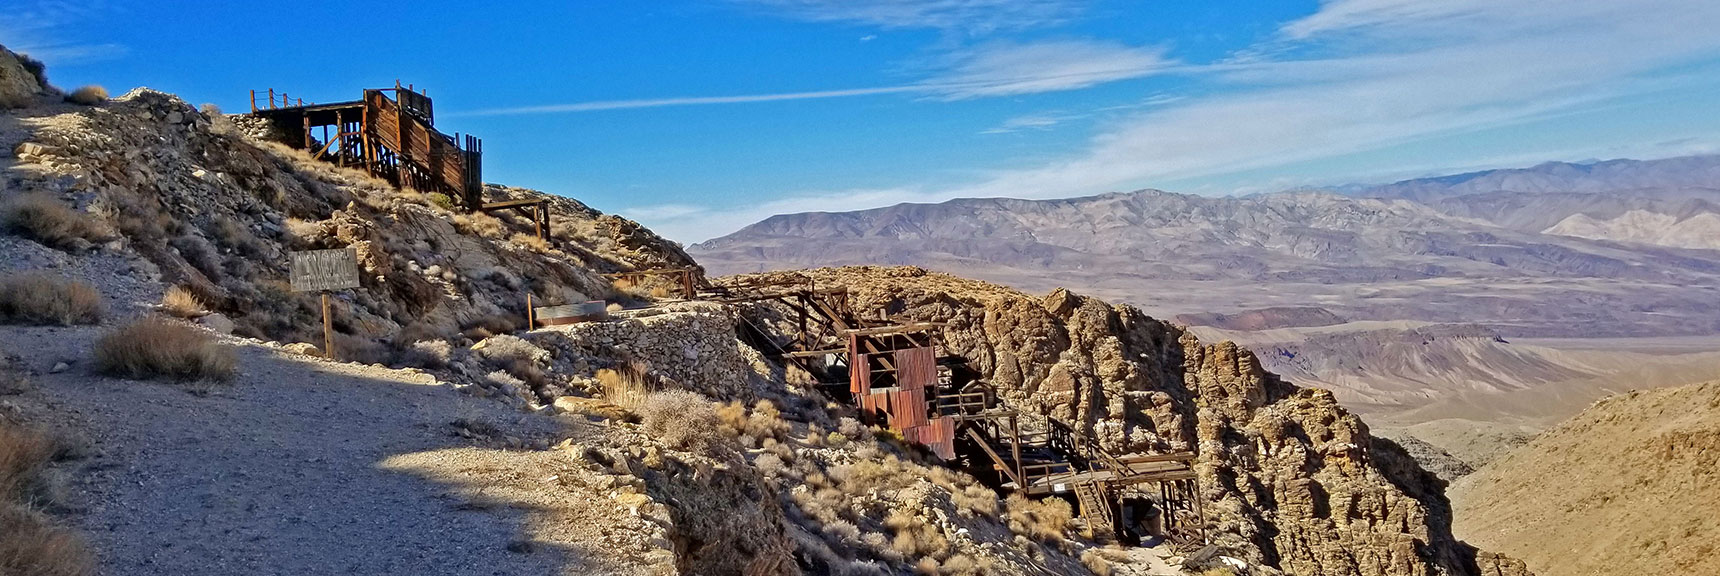 Approaching the Skidoo Stamp Mill | Skidoo Stamp Mill, Panamint Mountains, Death Valley National Park, CA